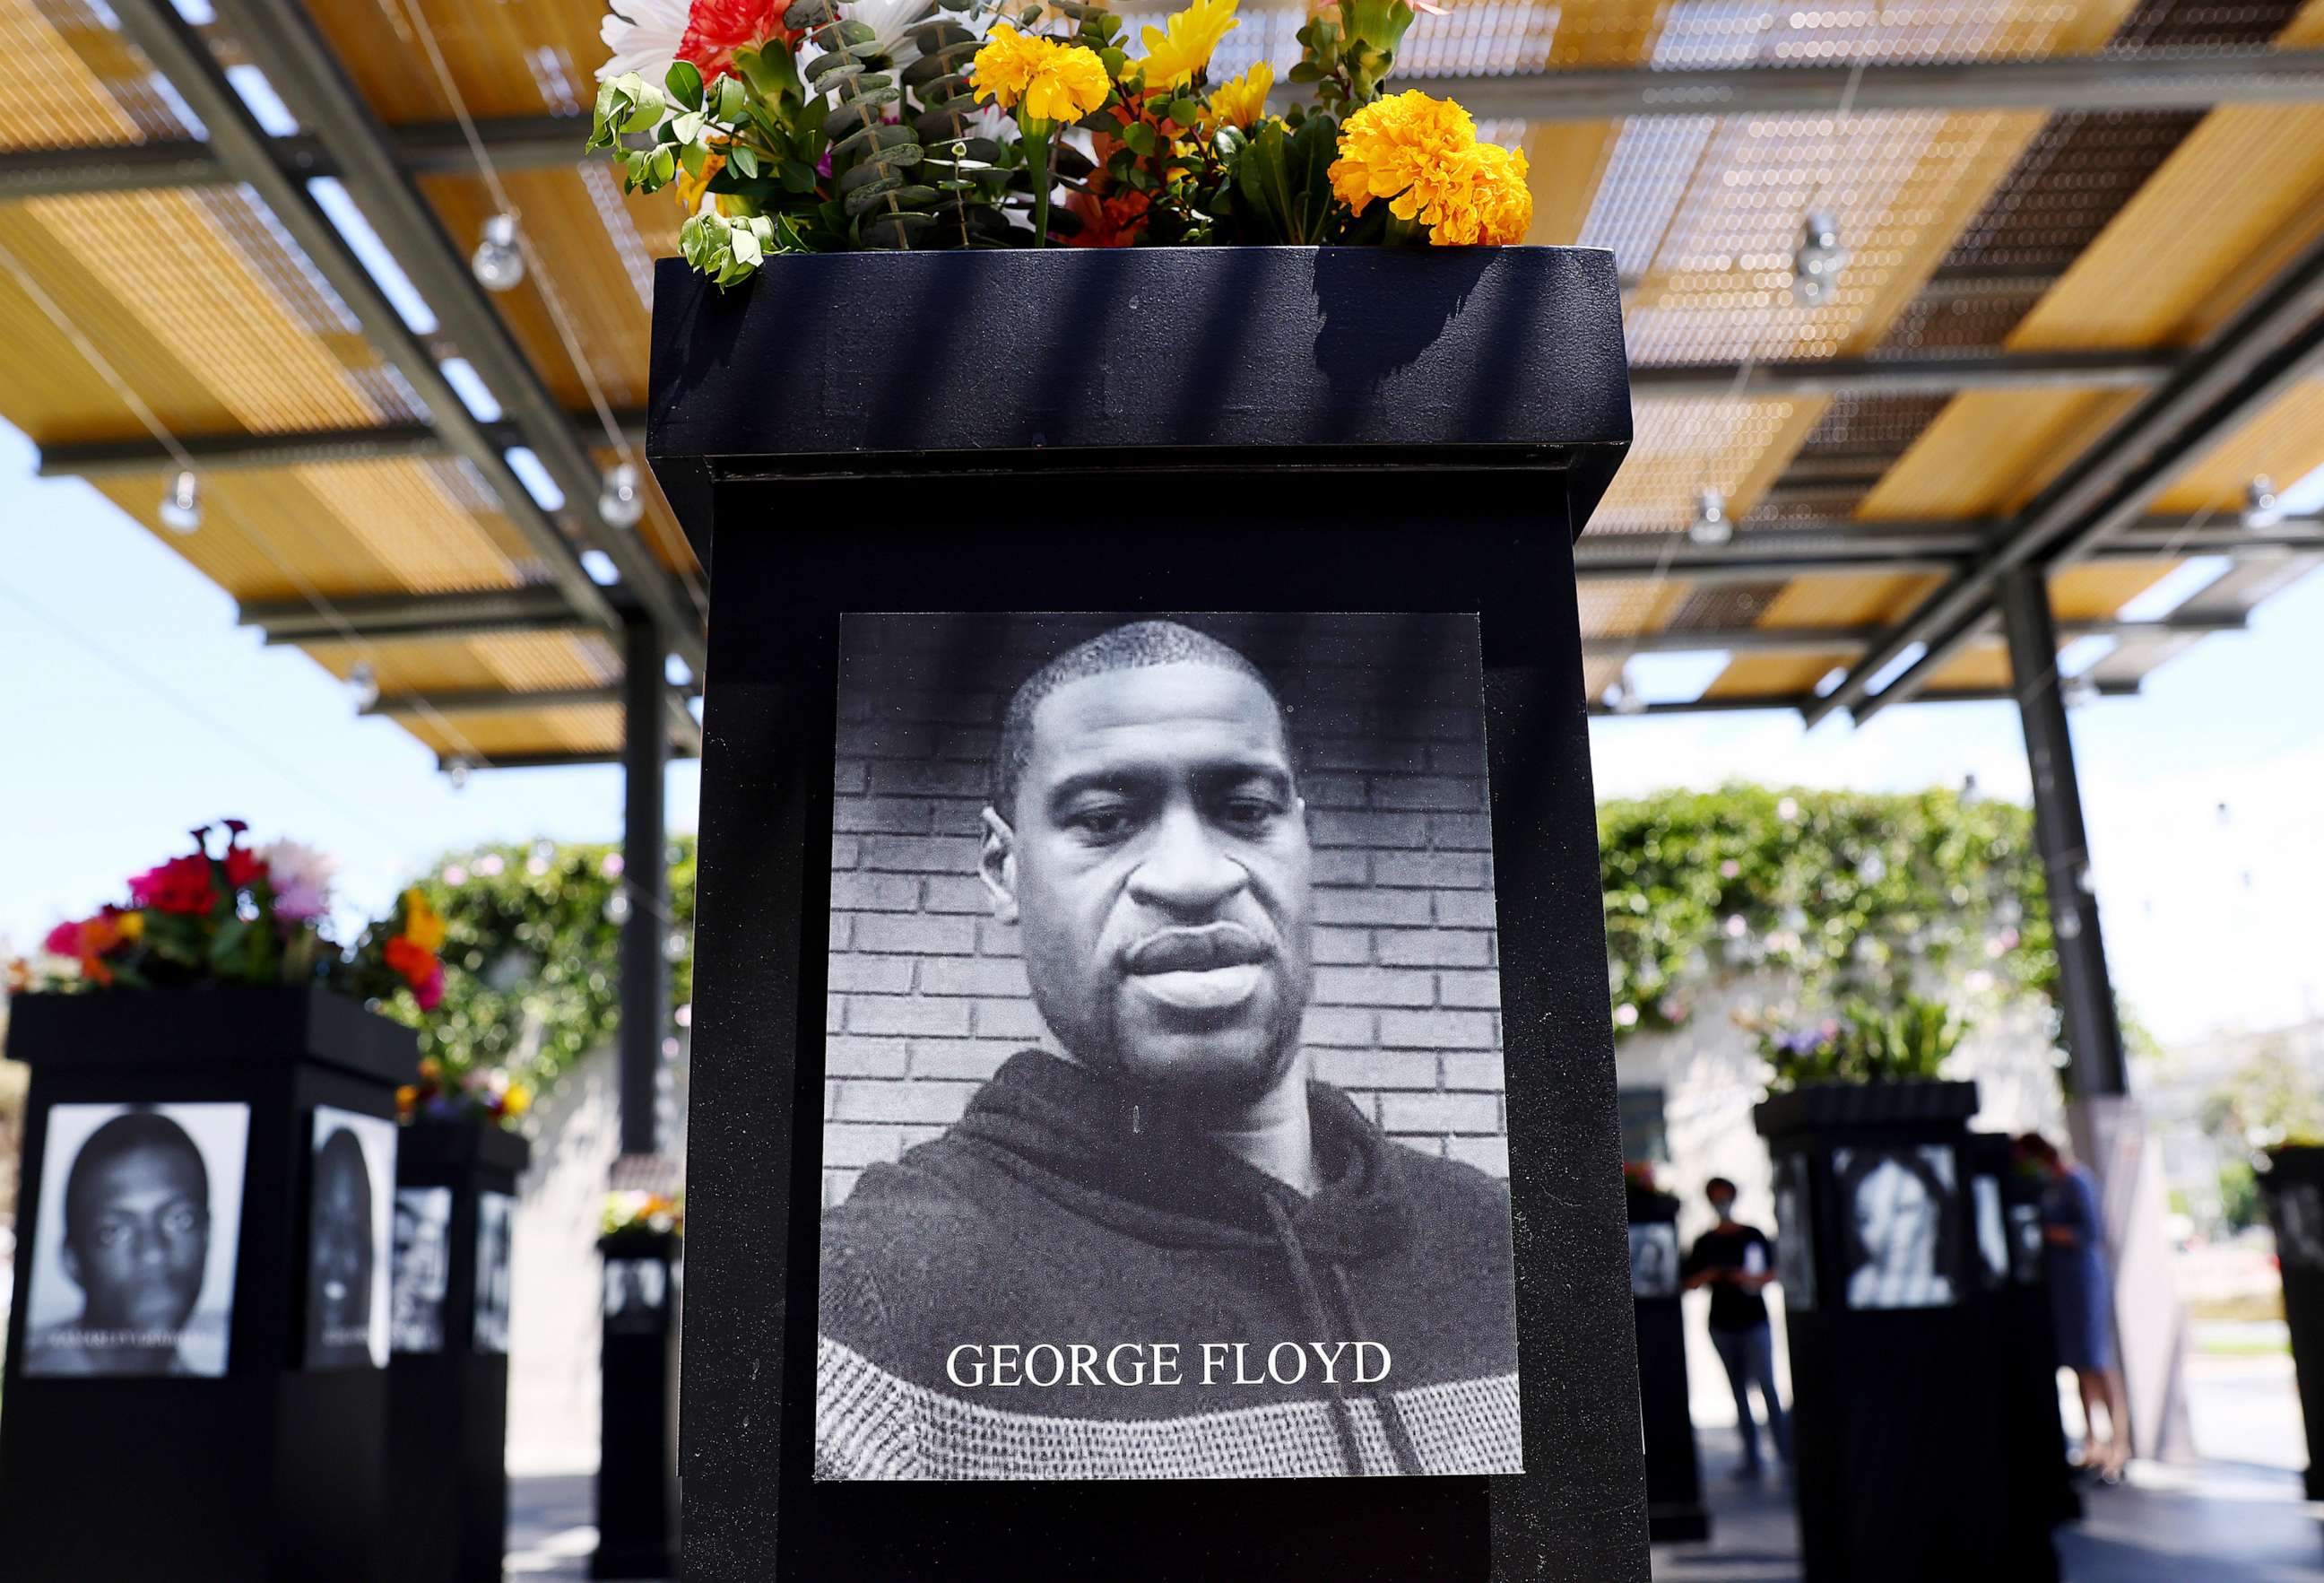 PHOTO: A photograph of George Floyd is displayed along with other photographs at the Say Their Names memorial exhibit at Martin Luther King Jr. Promenade, July 20, 2021, in San Diego, Calif.